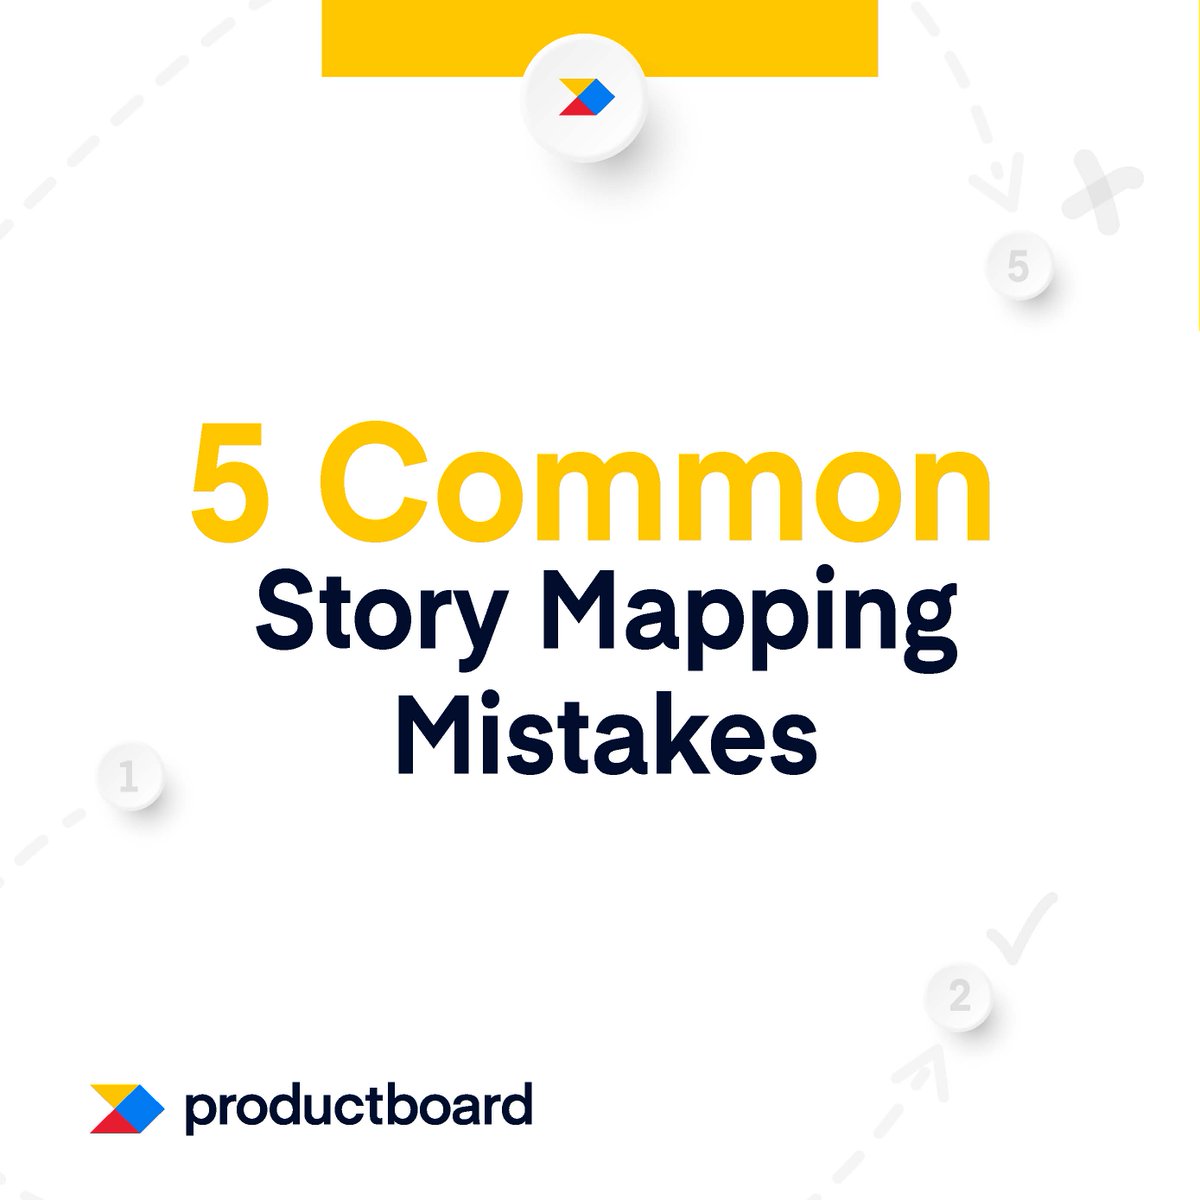 Avoid these 5 common story mapping mistakes. @Jeffpaton breaks down what product management teams should avoid in product development. It’s gold. bit.ly/3w9Joi5